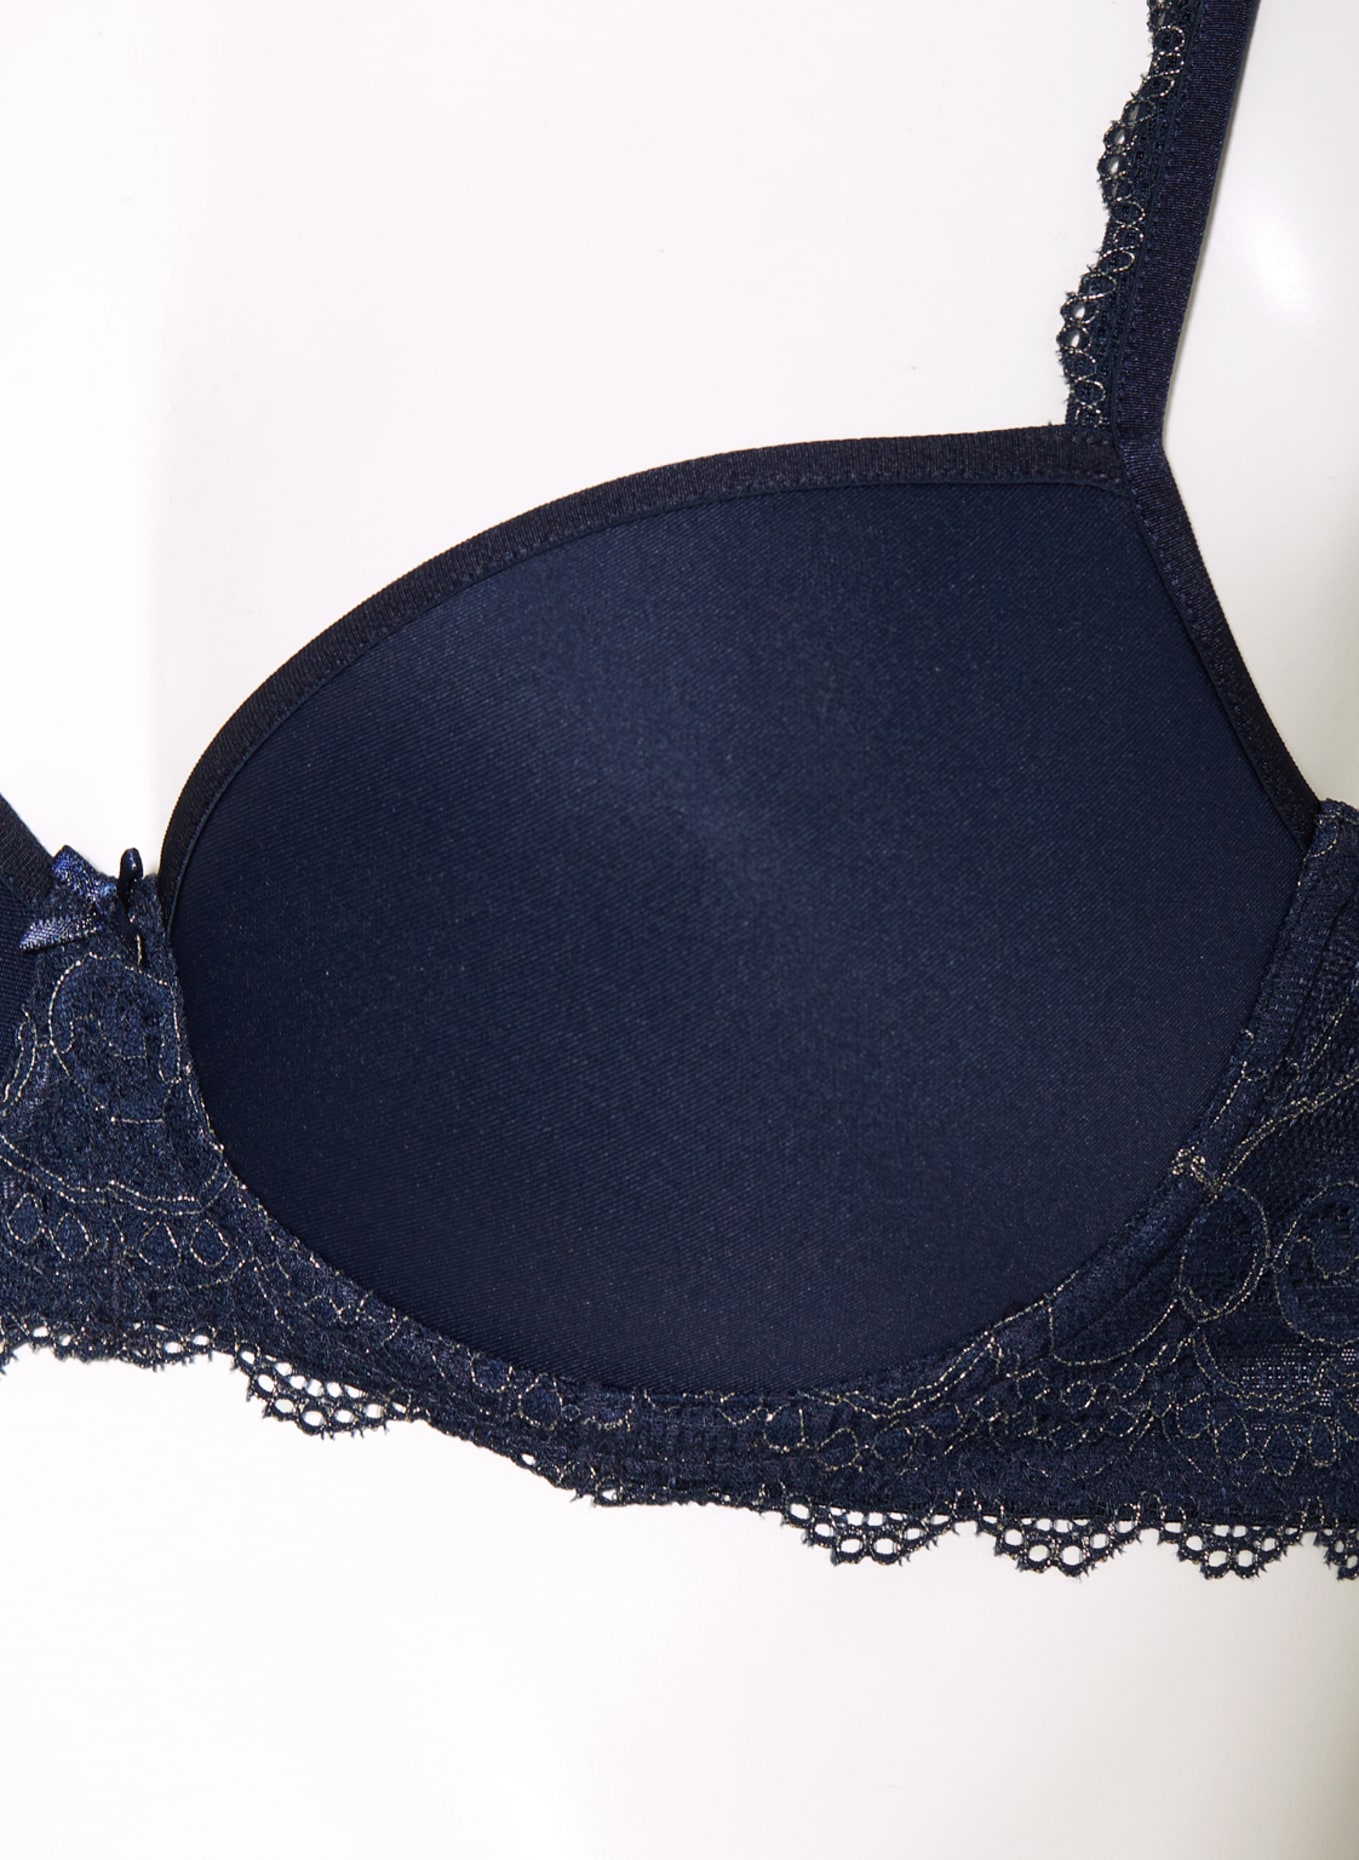 Serie Amorous Full Cup Spacer Bra by Mey